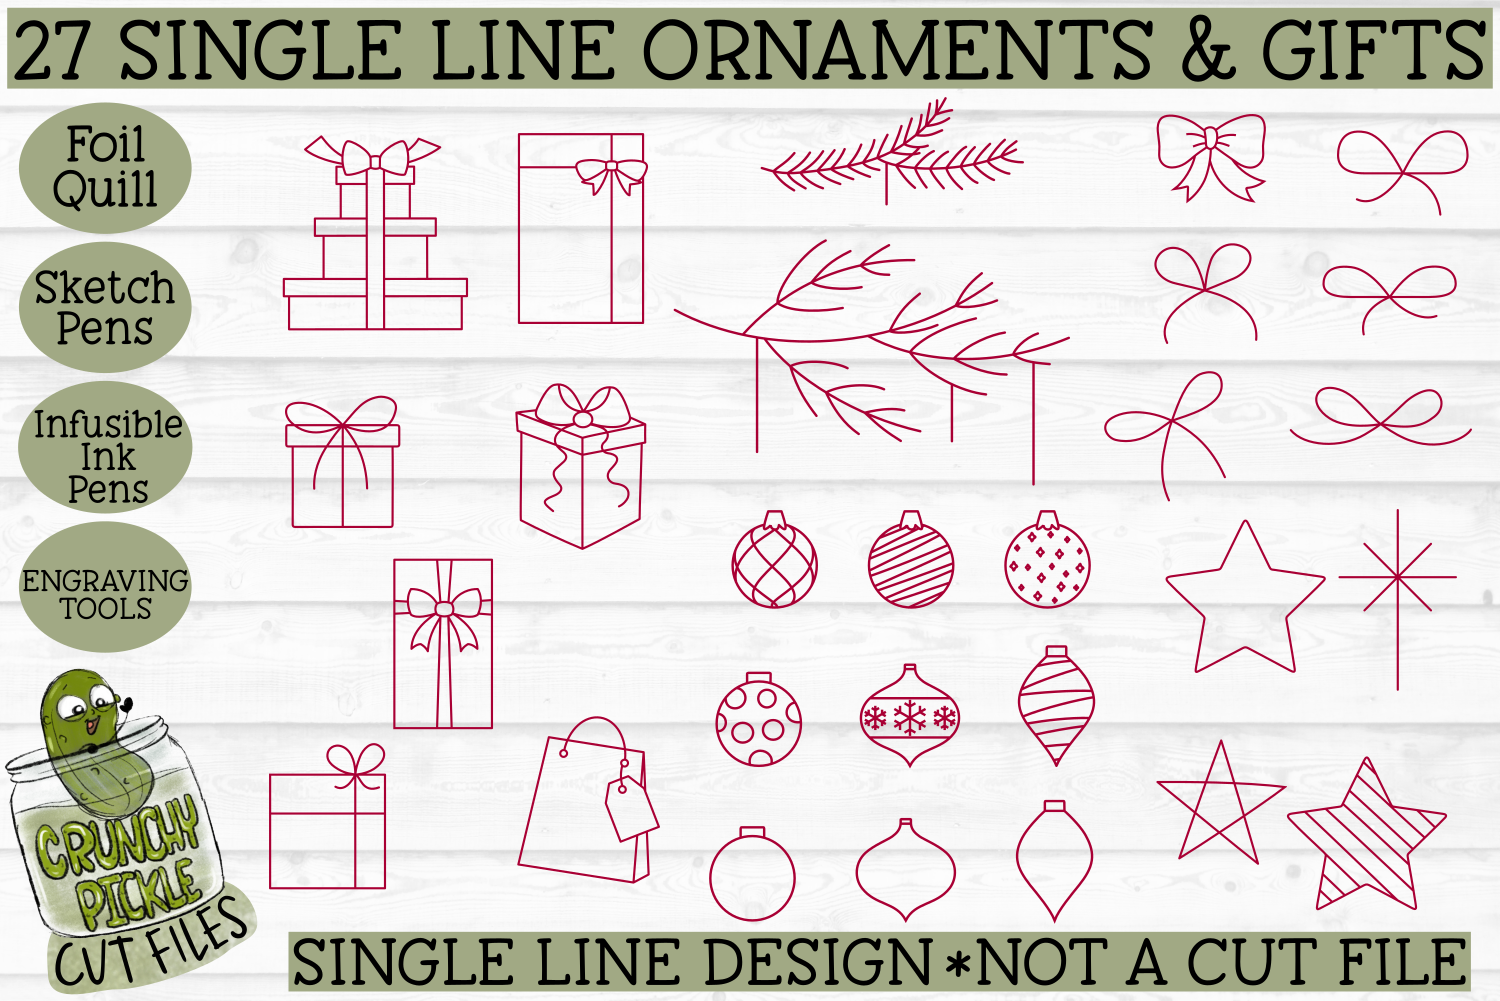 Download Foil Quill 27 Christmas Ornaments Gifts Set Single Line Svg Design By Crunchy Pickle Thehungryjpeg Com